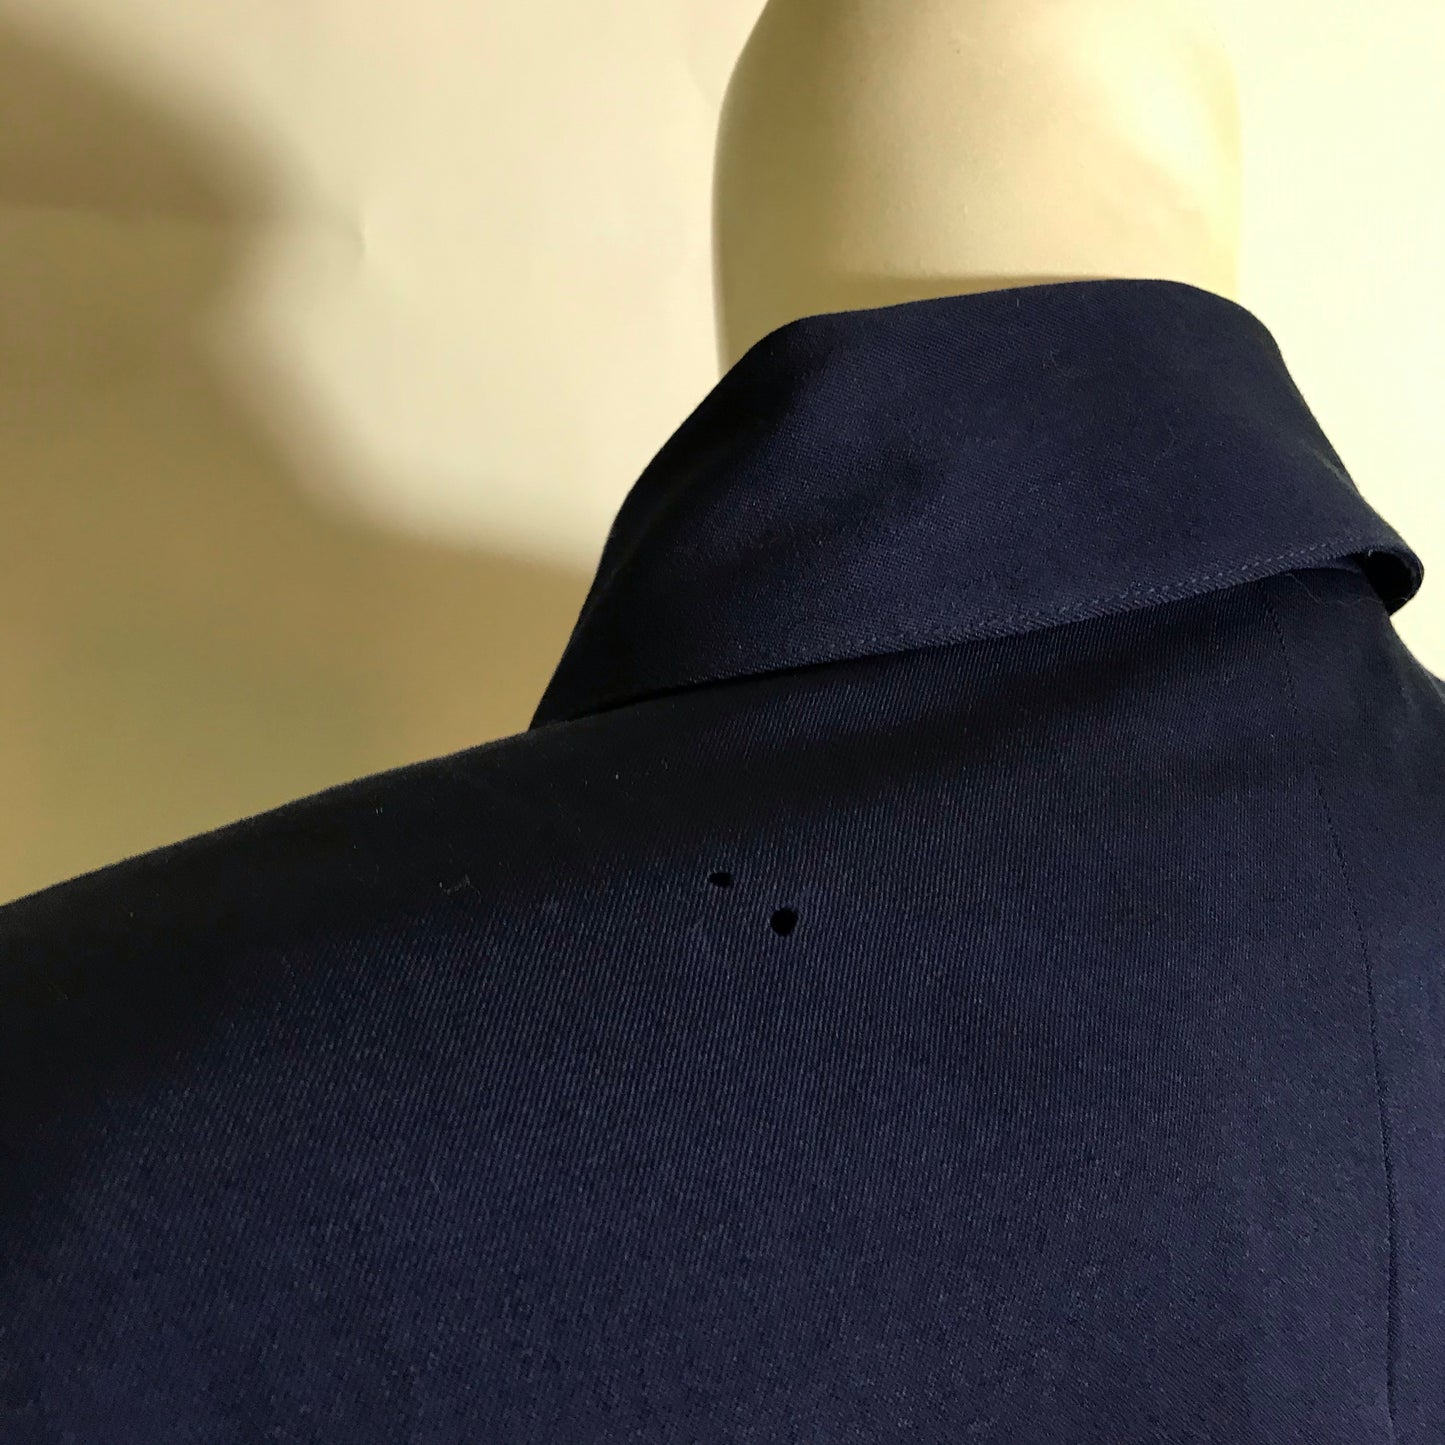 Nipped Waist Blue Wool Pocket Trimmed Suit Jacket circa 1980s